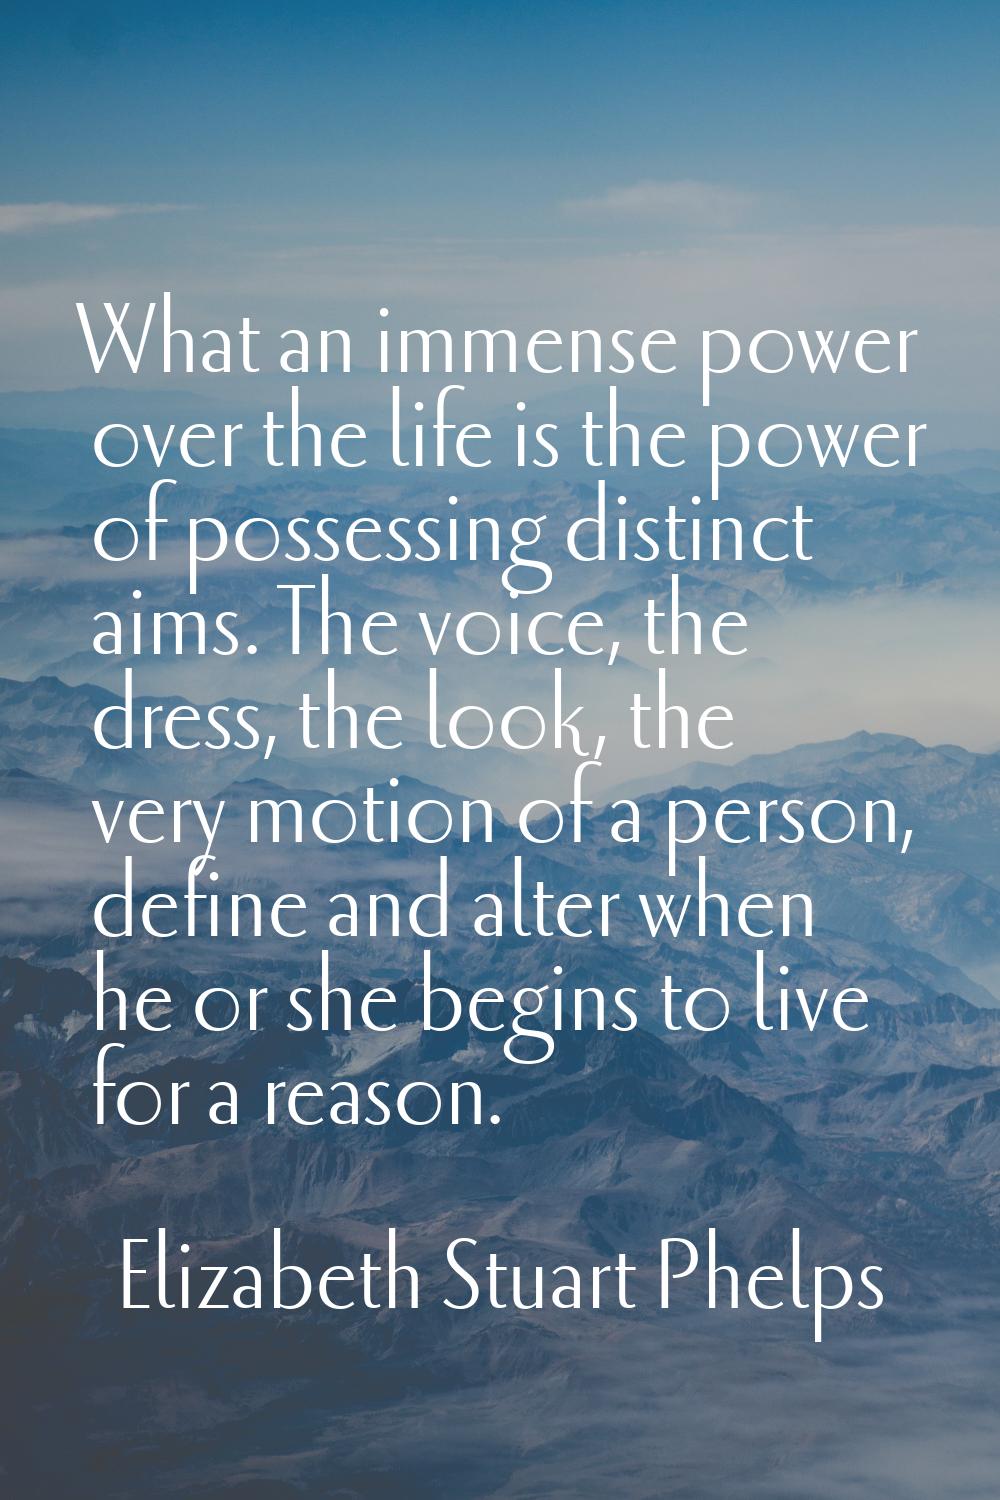 What an immense power over the life is the power of possessing distinct aims. The voice, the dress,